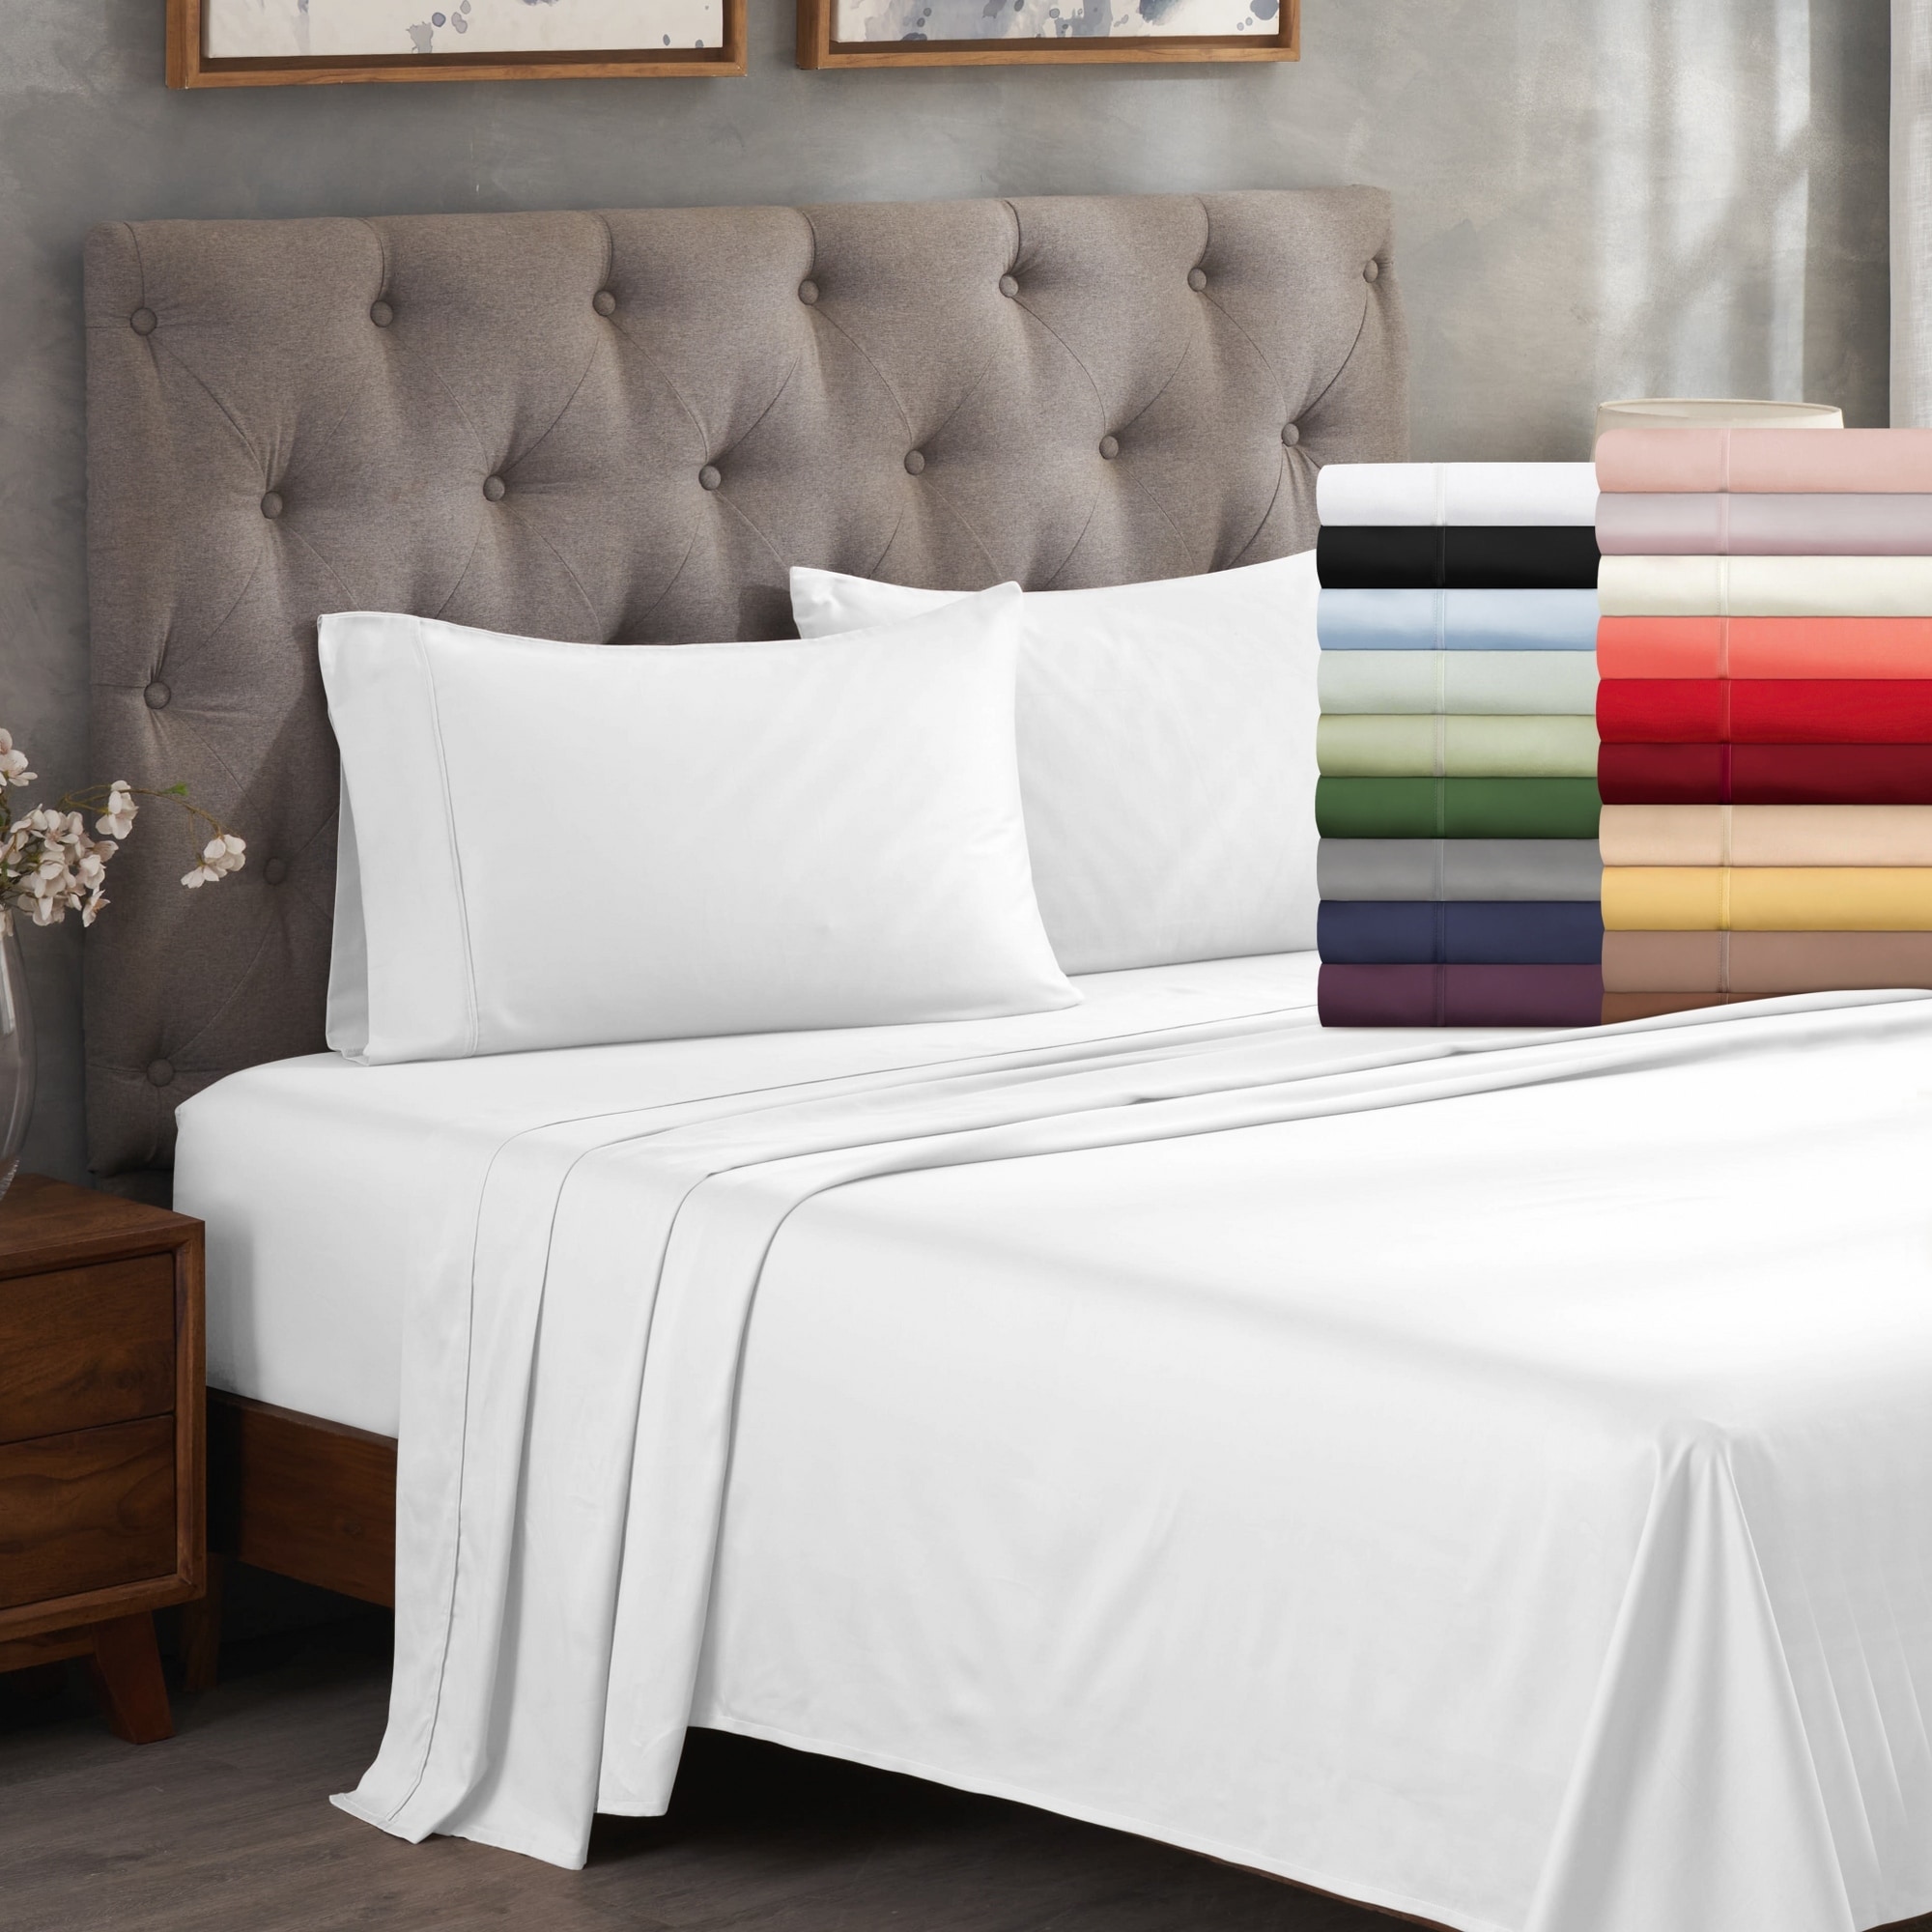 COLOR SENSE Color sense 300 tc silver queen sheet Set Queen  300-Thread-Count Cotton Silver Bed-Sheet in the Bed Sheets department at